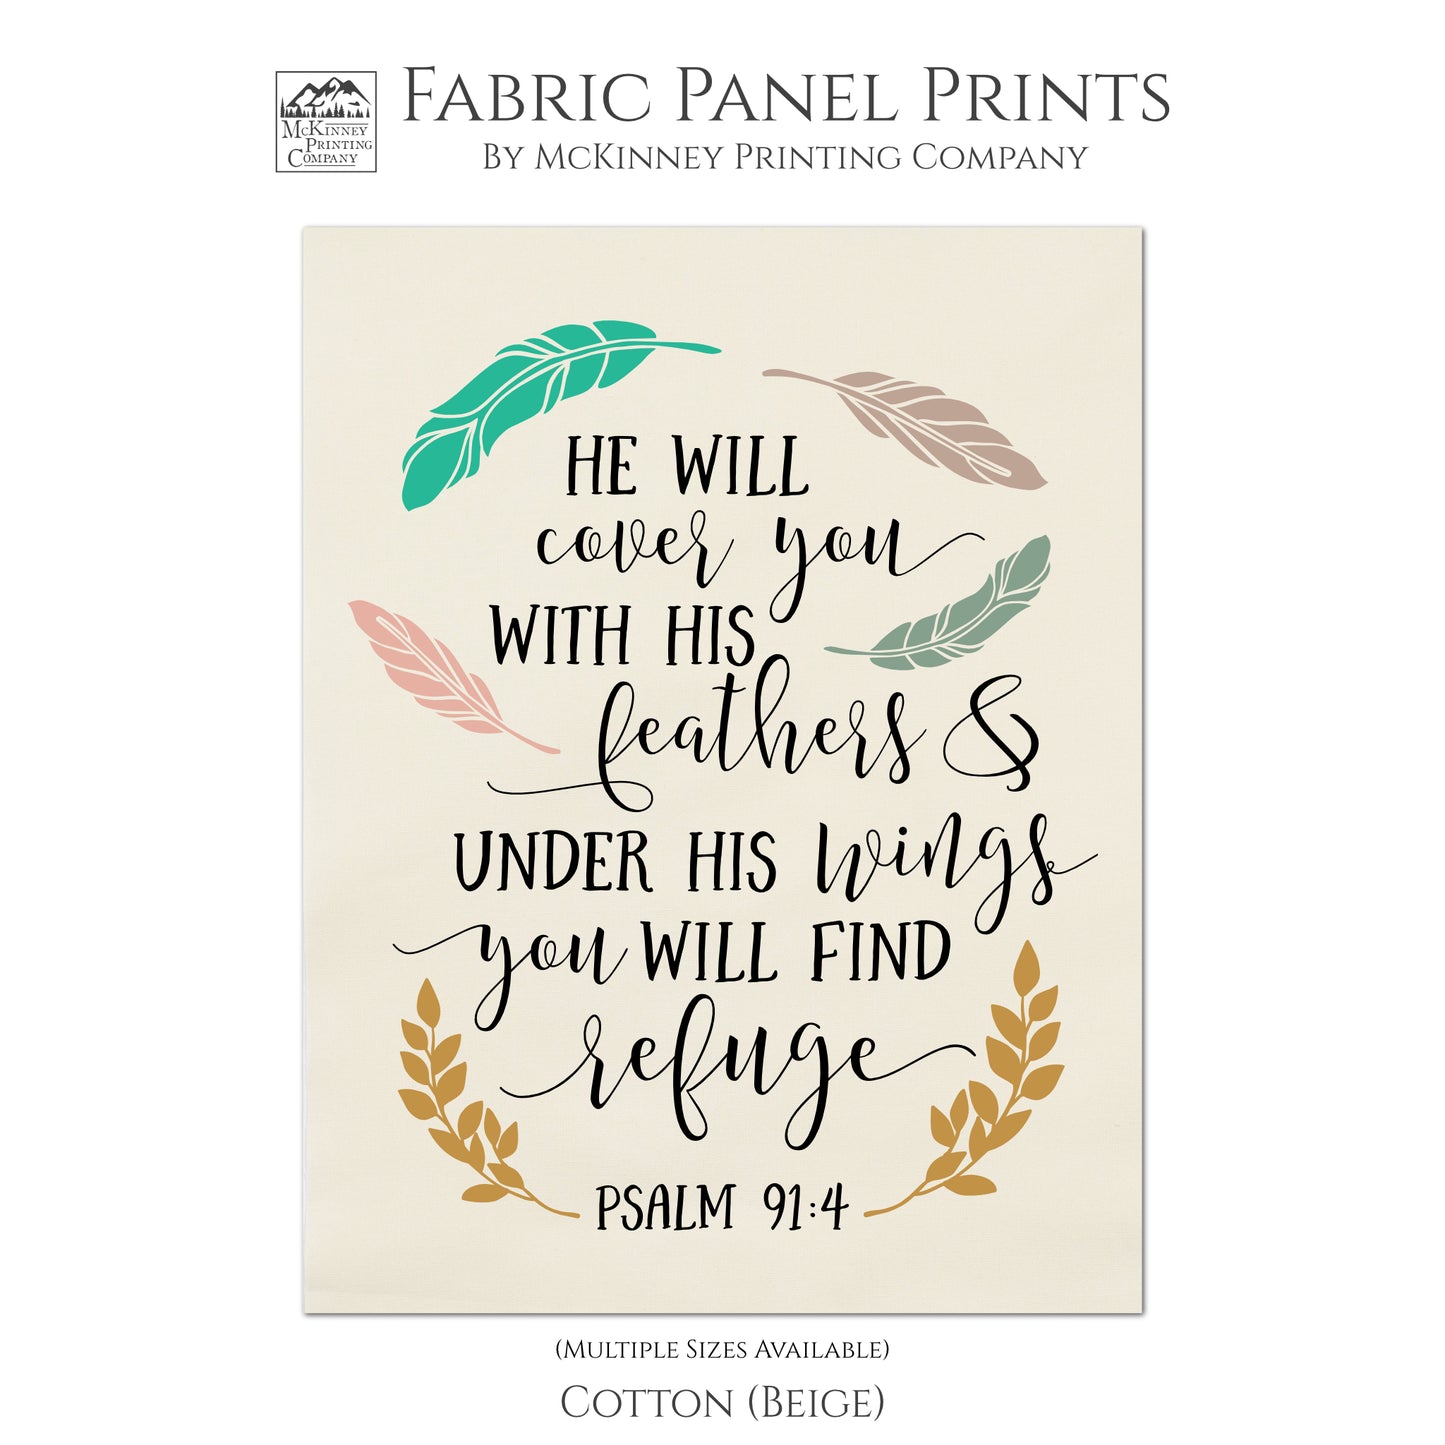 He will cover you with His feathers and under His wings you will find refuge - Psalm 91:4 - Fabric Panel Print, Quilt Block, Scripture Fabric - Cotton